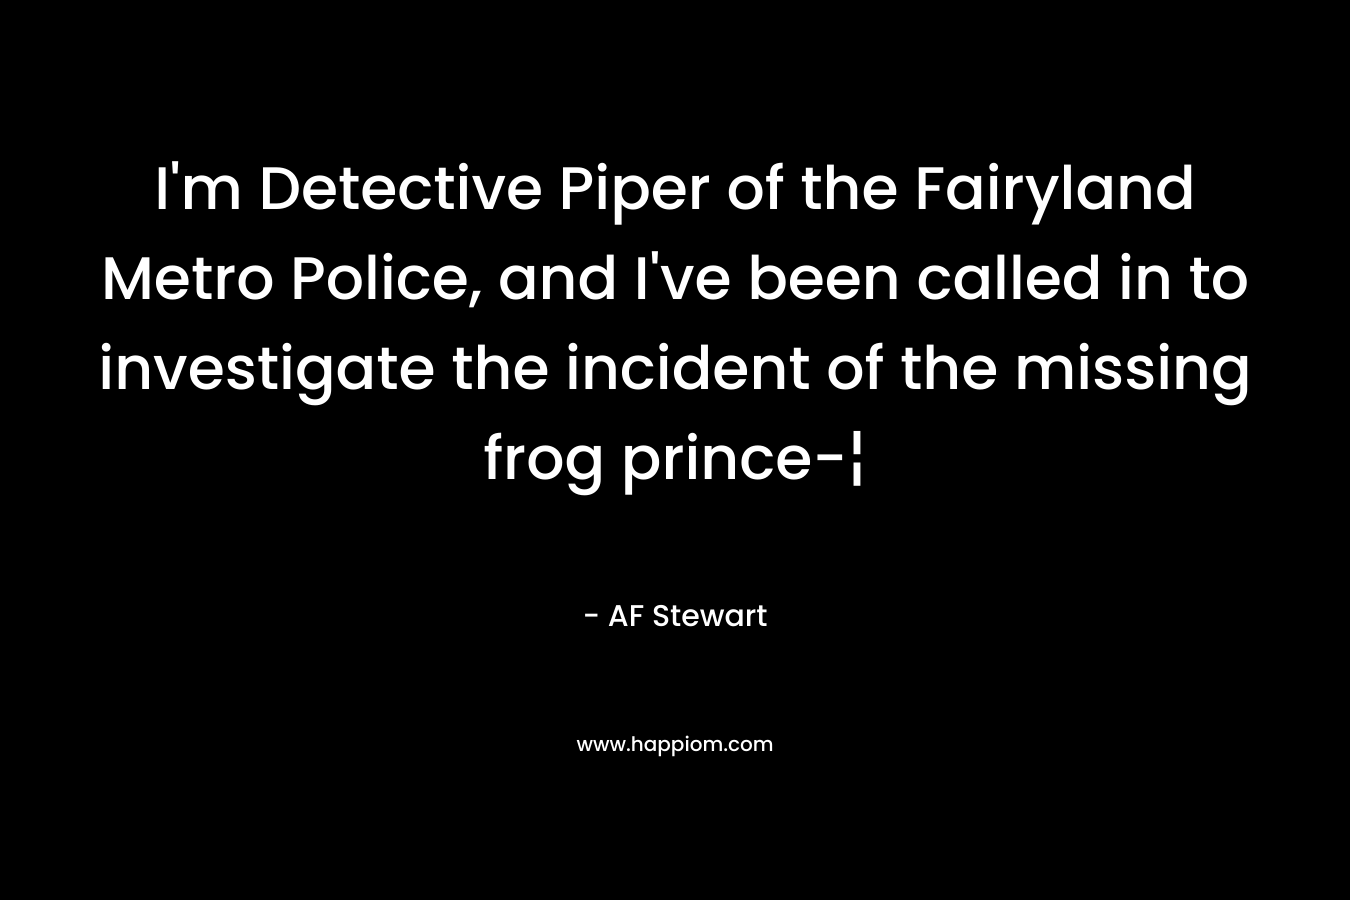 I’m Detective Piper of the Fairyland Metro Police, and I’ve been called in to investigate the incident of the missing frog prince-¦ – AF Stewart